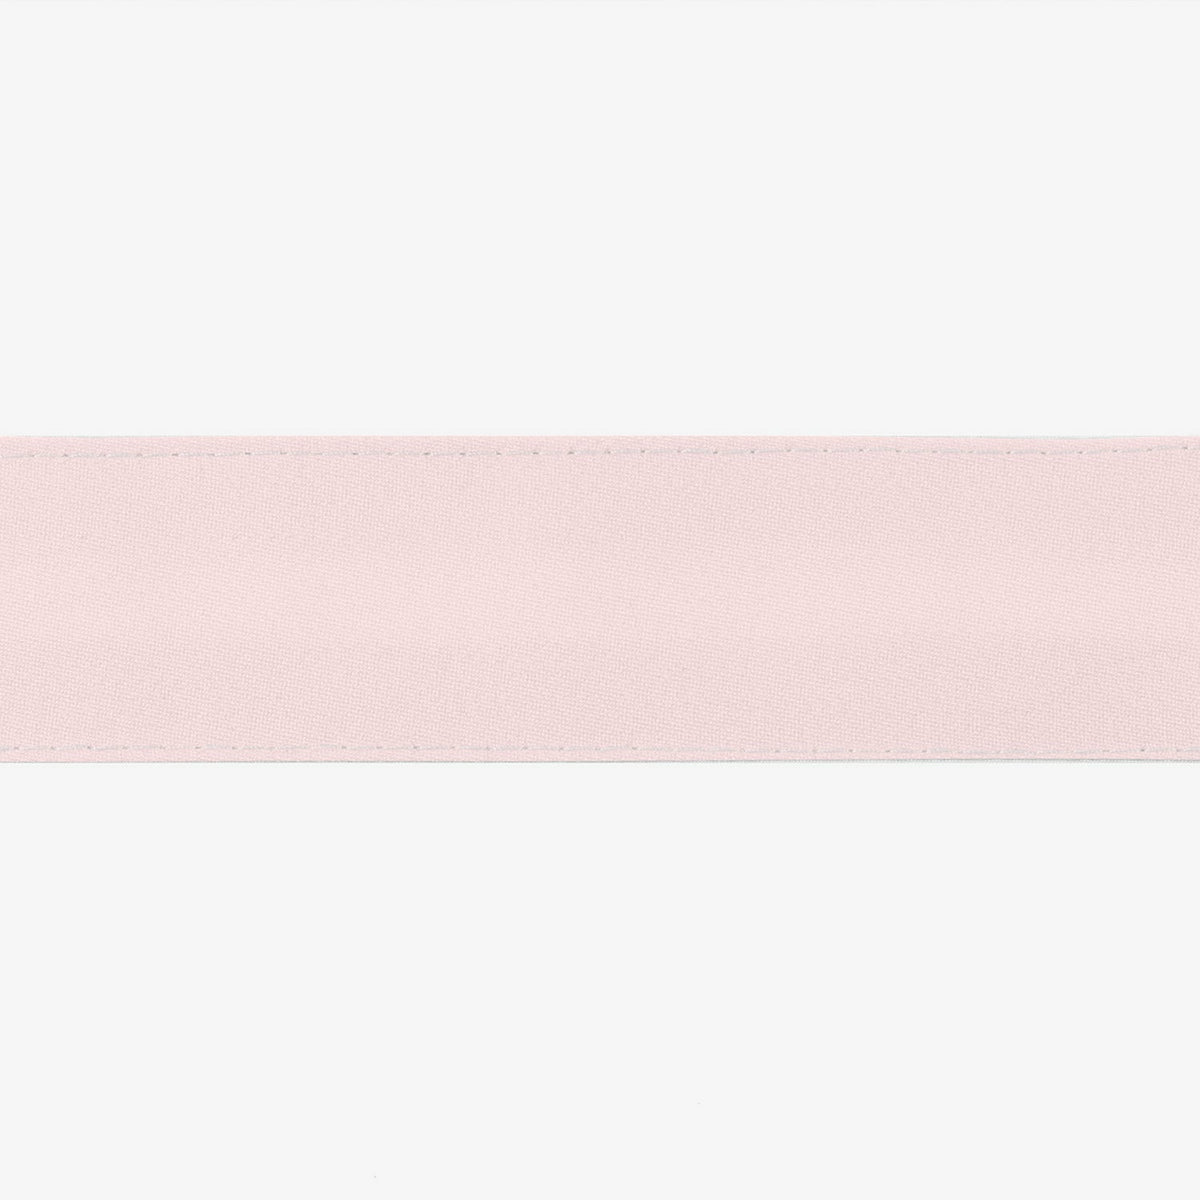 Matouk Lowell Bedding Collection Pink Swatch Fine Linens